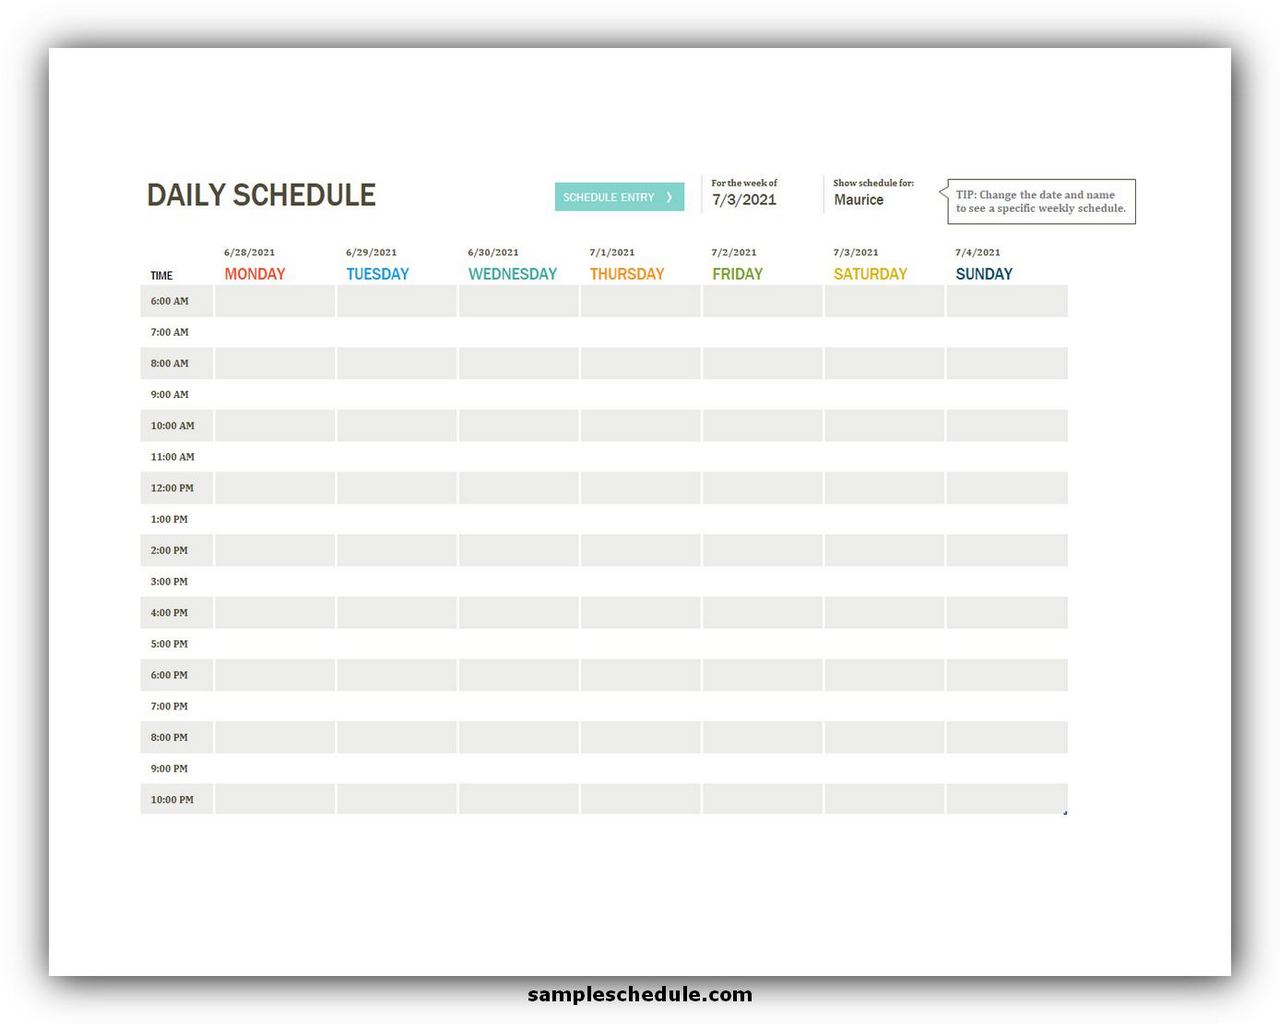 Daily Schedule Template Excel Free